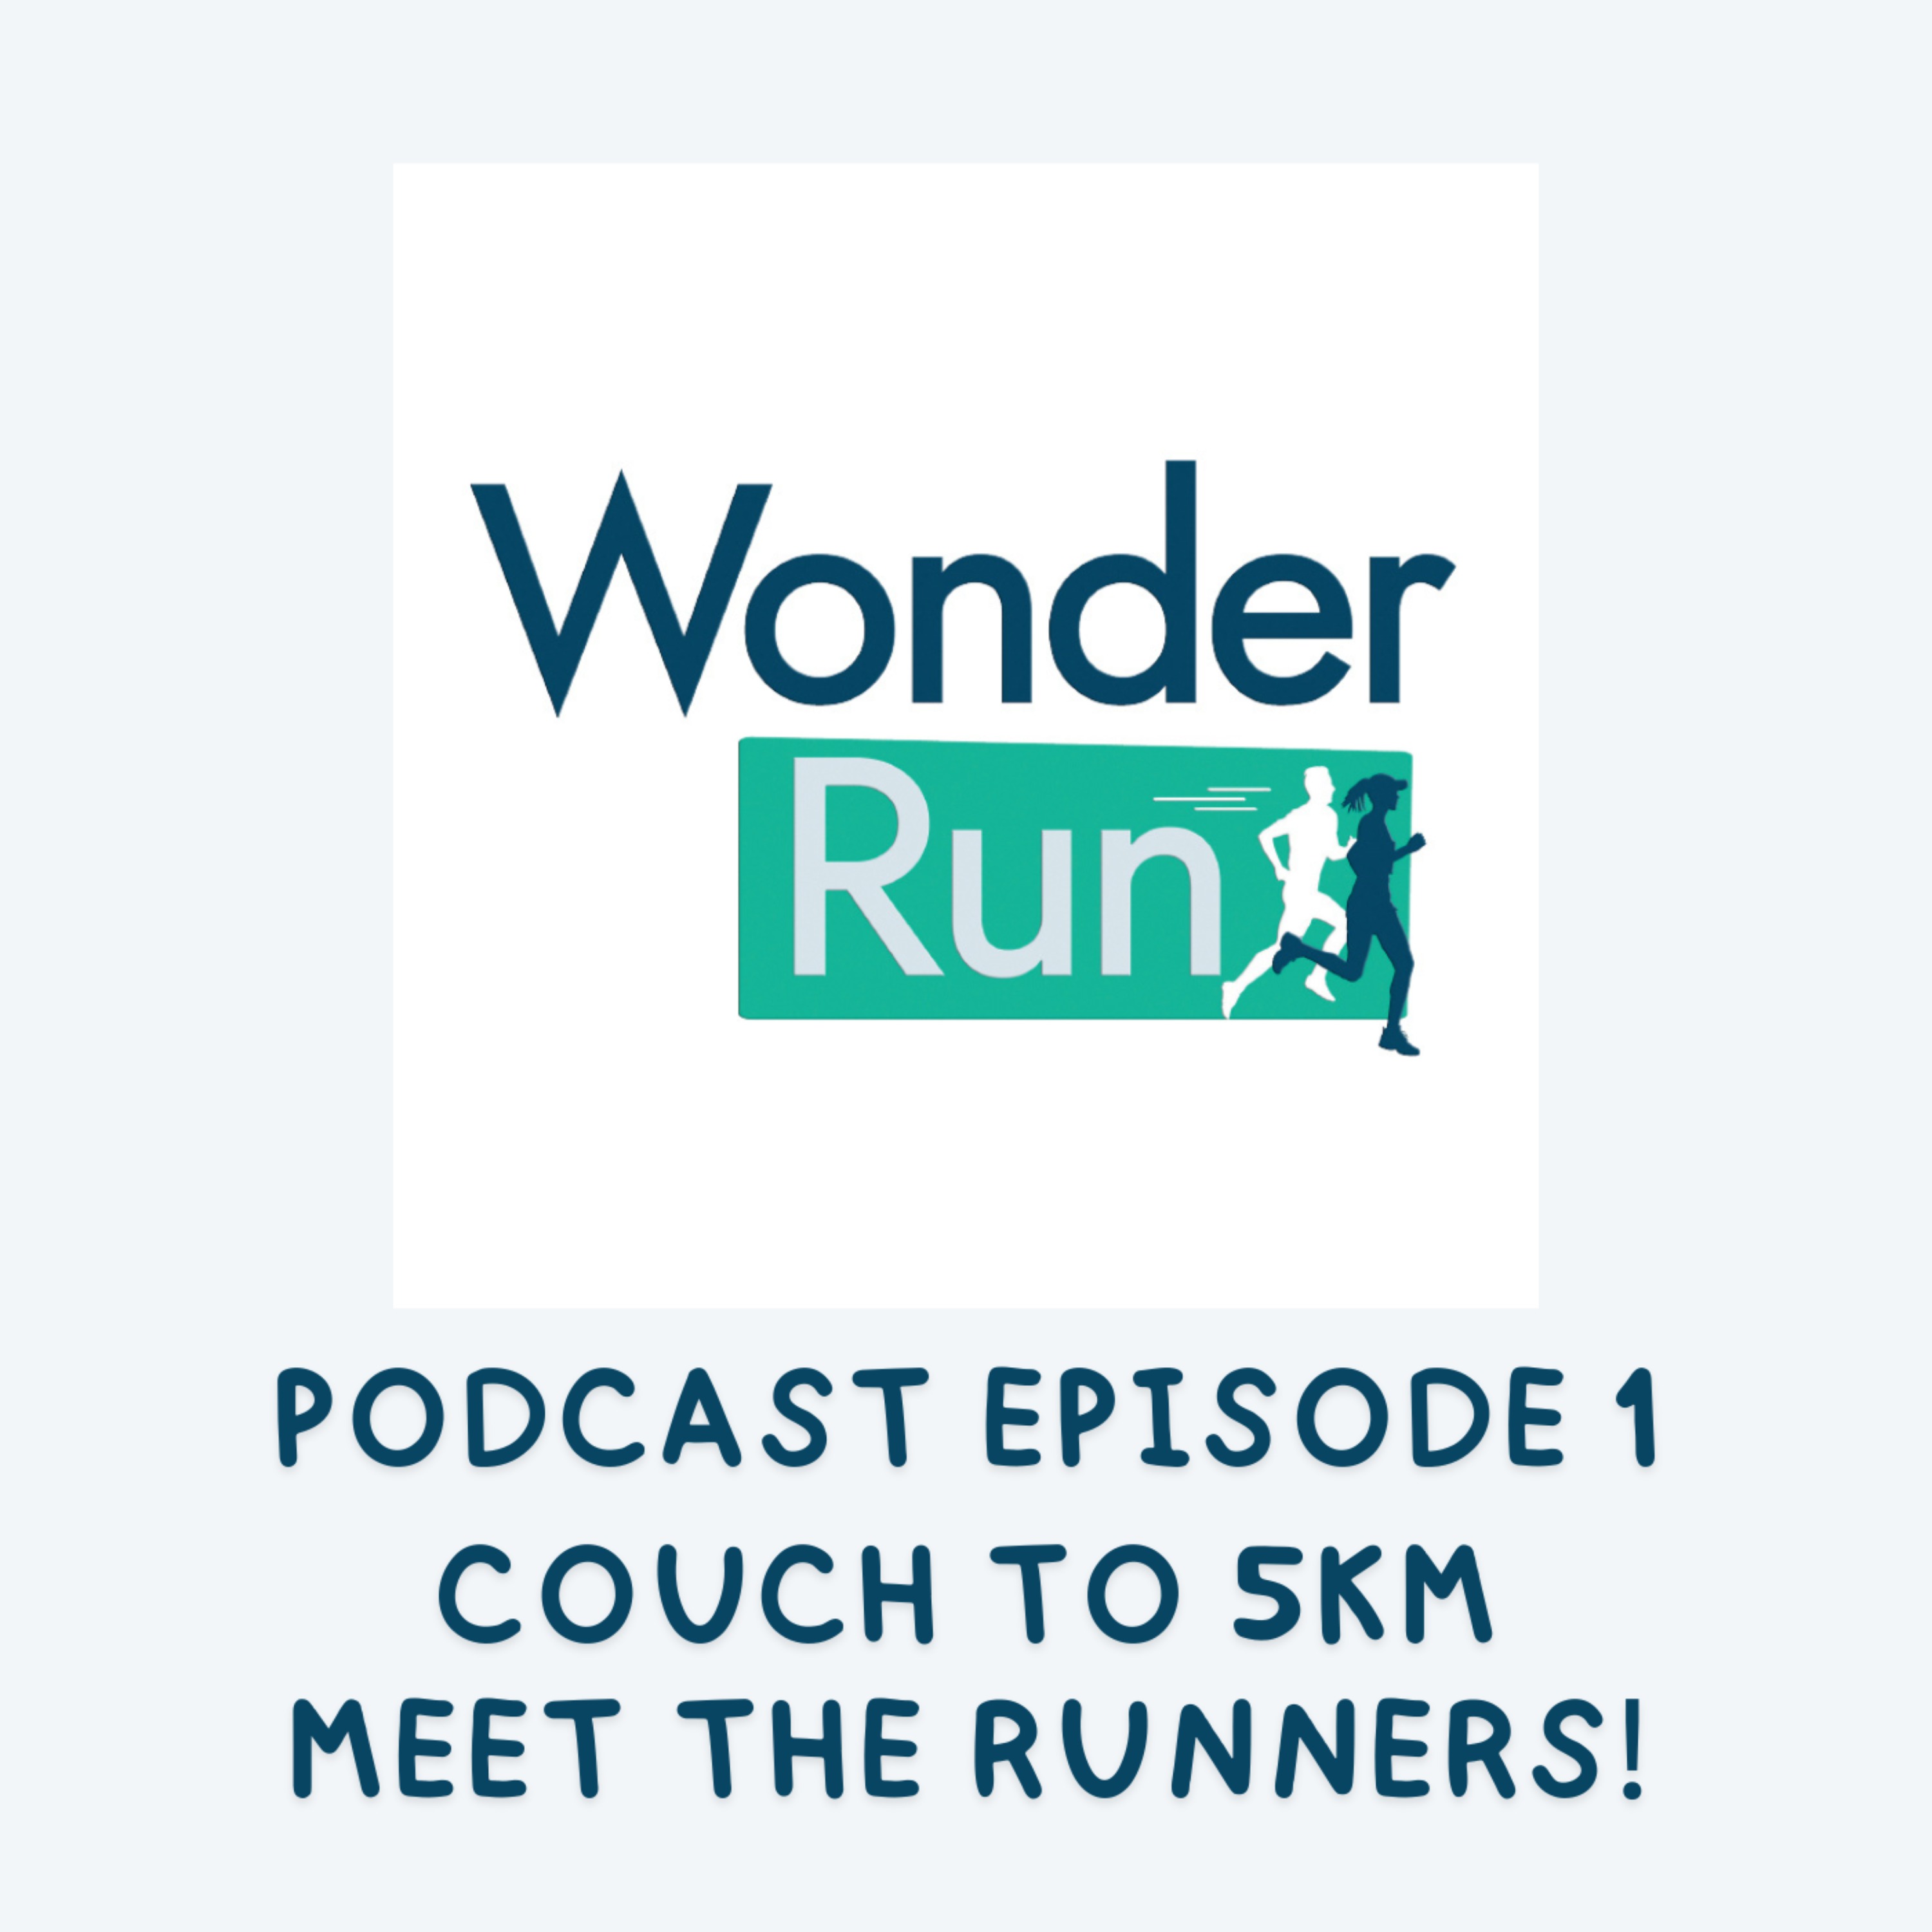 Couch to 5km - Meet the Runners!